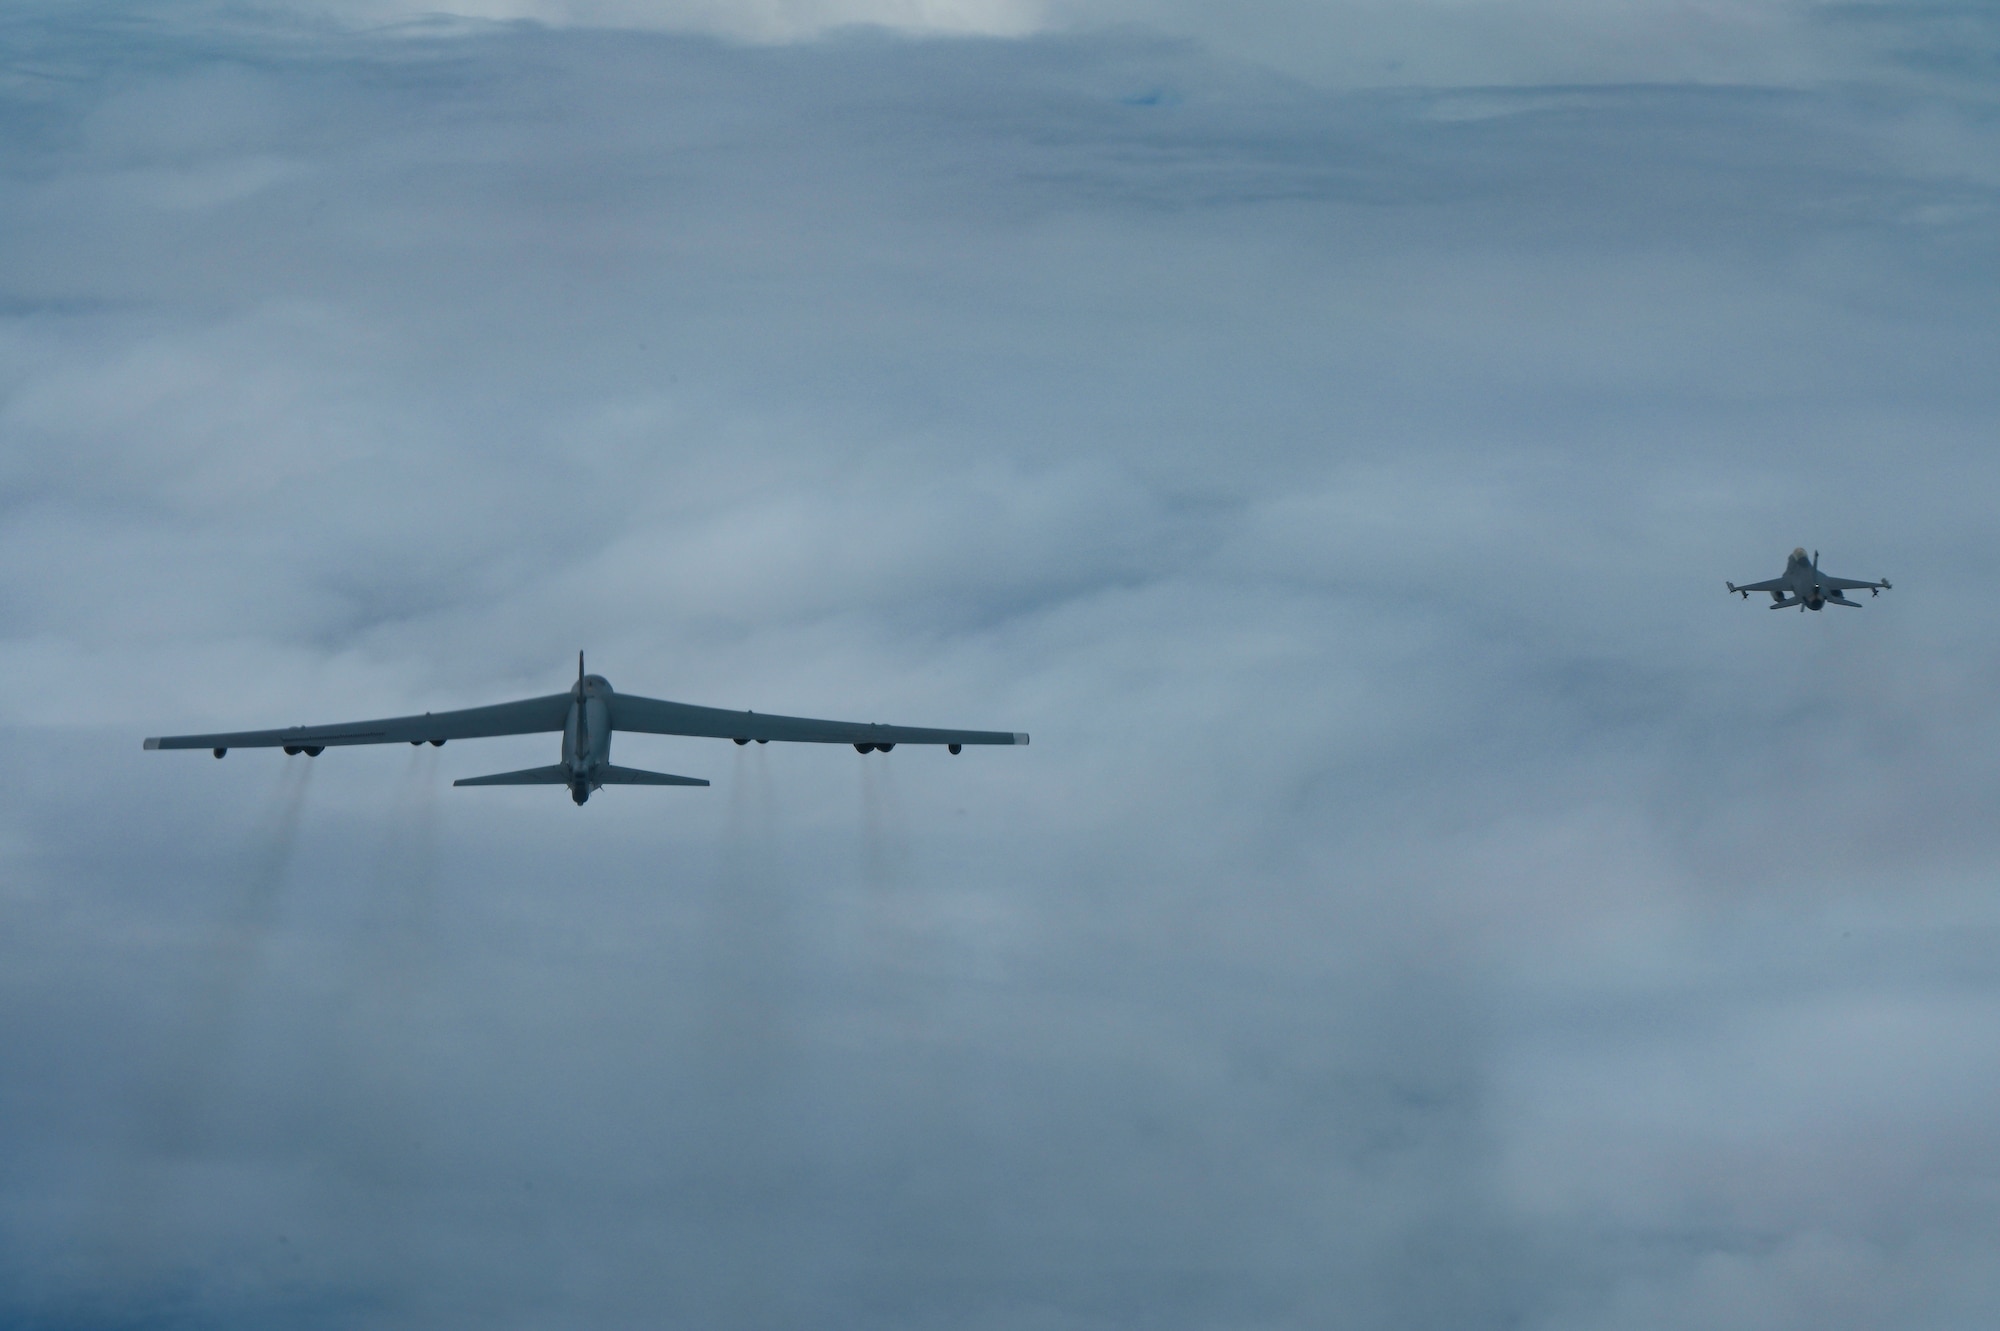 A U.S. Air Force B-52 Stratofortress assigned to the 2nd Bomb Wing, Barksdale Air Force Base, Louisiana, flies next to an Indonesian Air Force F-16 during a Bomber Task Force deployment in the Indo-Pacific region, Sept. 1, 2021. This is the first time a B-52 has integrated with the Indonesian Air Force during flight. The B-52 is a long range bomber with a range of approximately 8,800 miles, enabling rapid support of Bomber Task Force missions or deployments and reinforcing global security and stability. (U.S. Air Force photo by Tech. Sgt. Matthew Lotz)